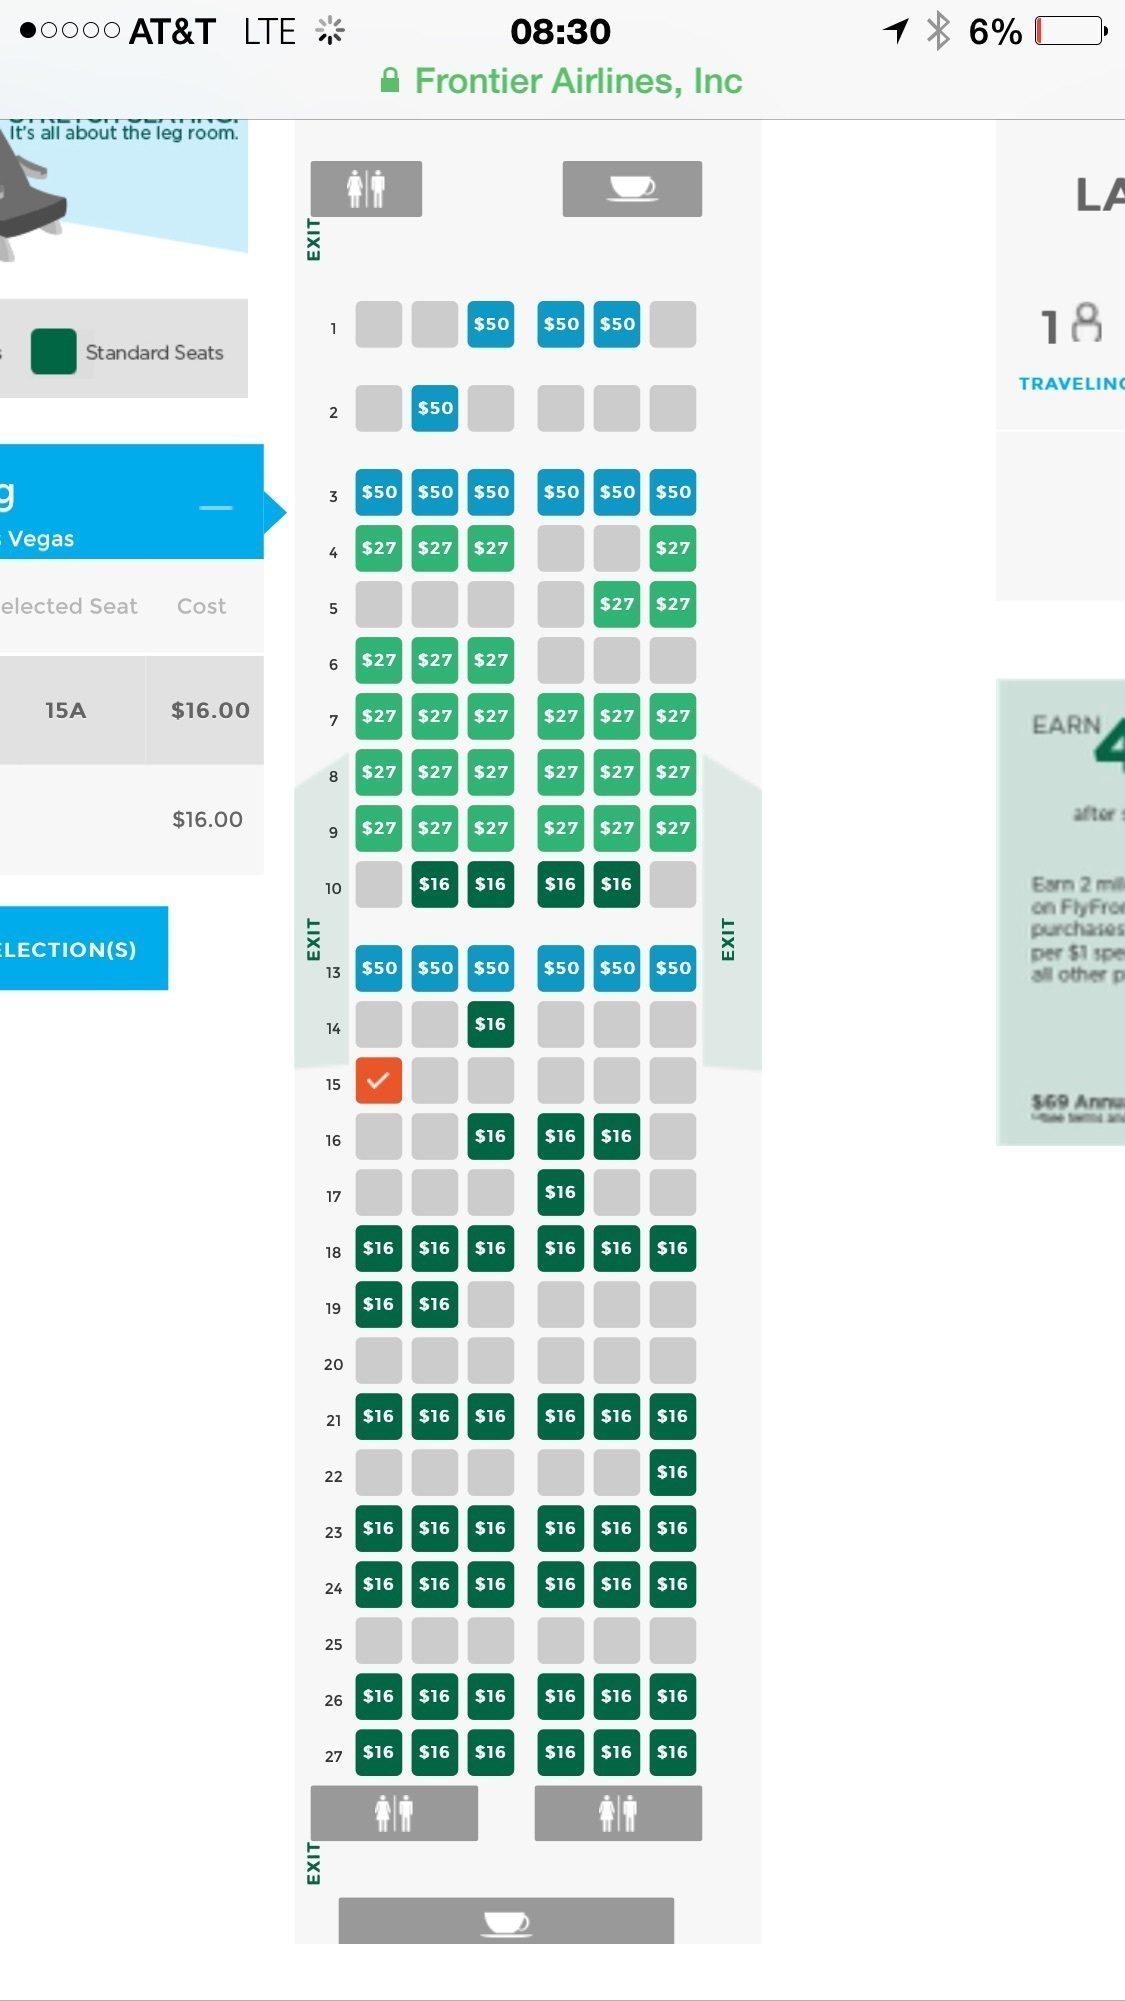 frontier airlines seat assignment fees